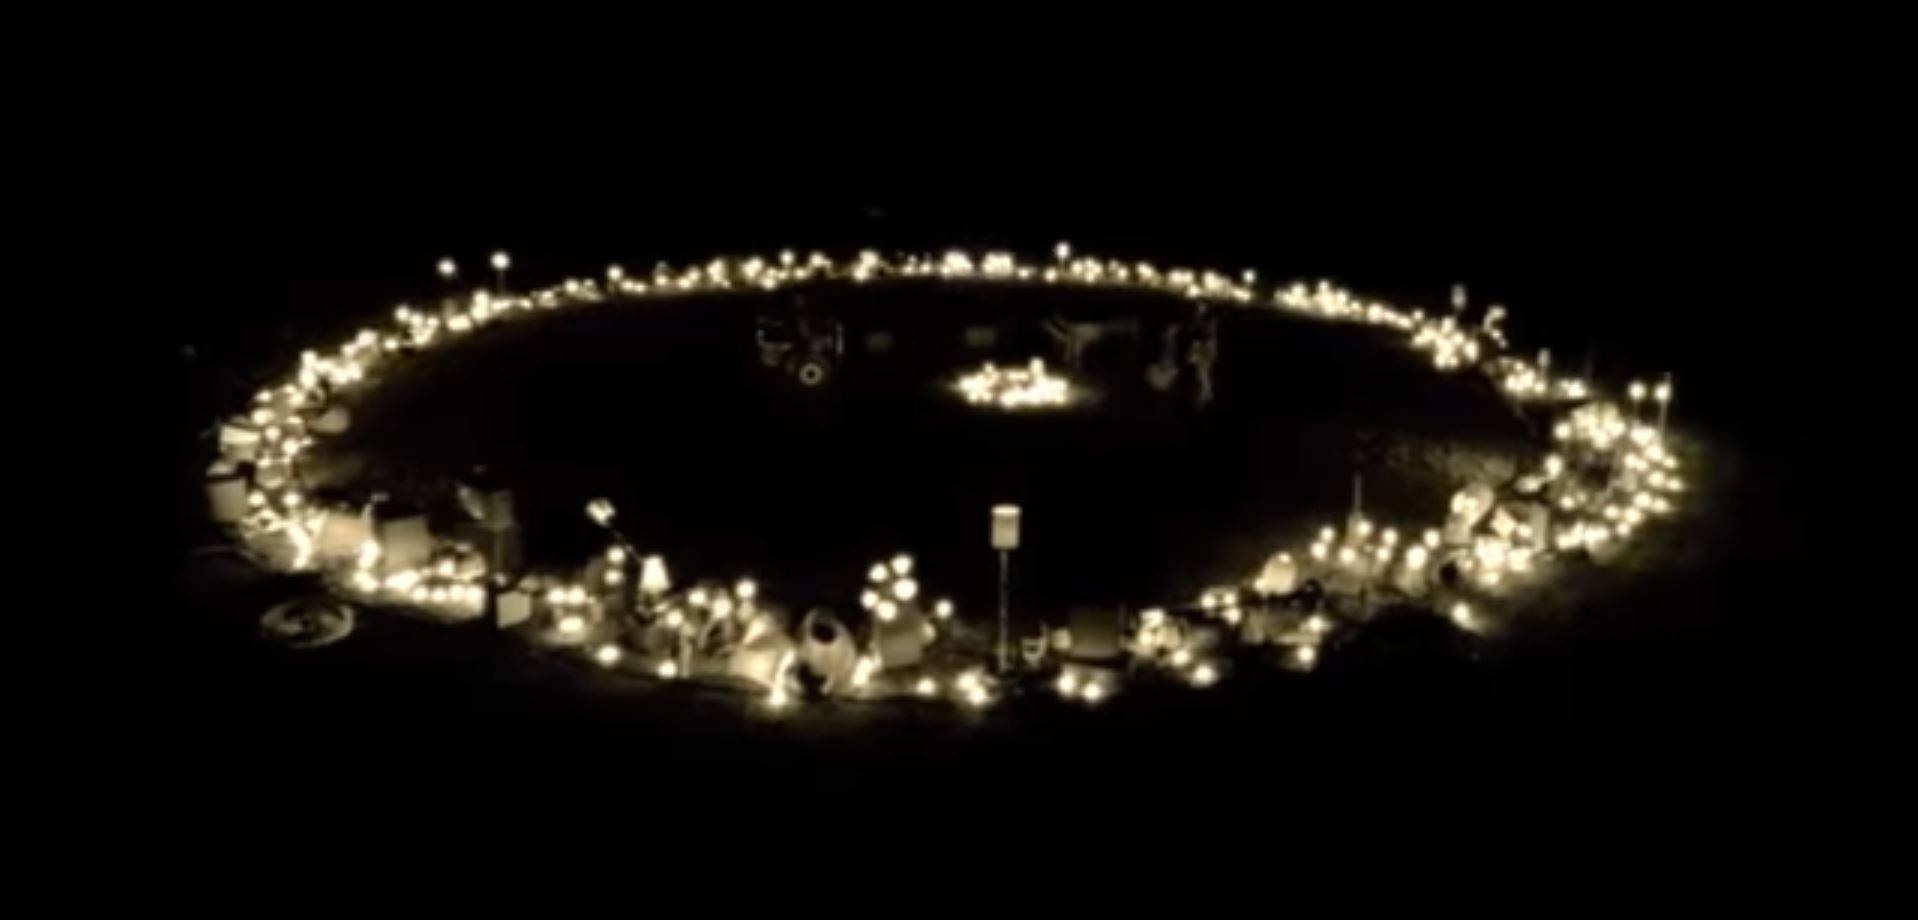 A circle formation of lights in a field at night. The band is barely visible, playing in the centre of the circle